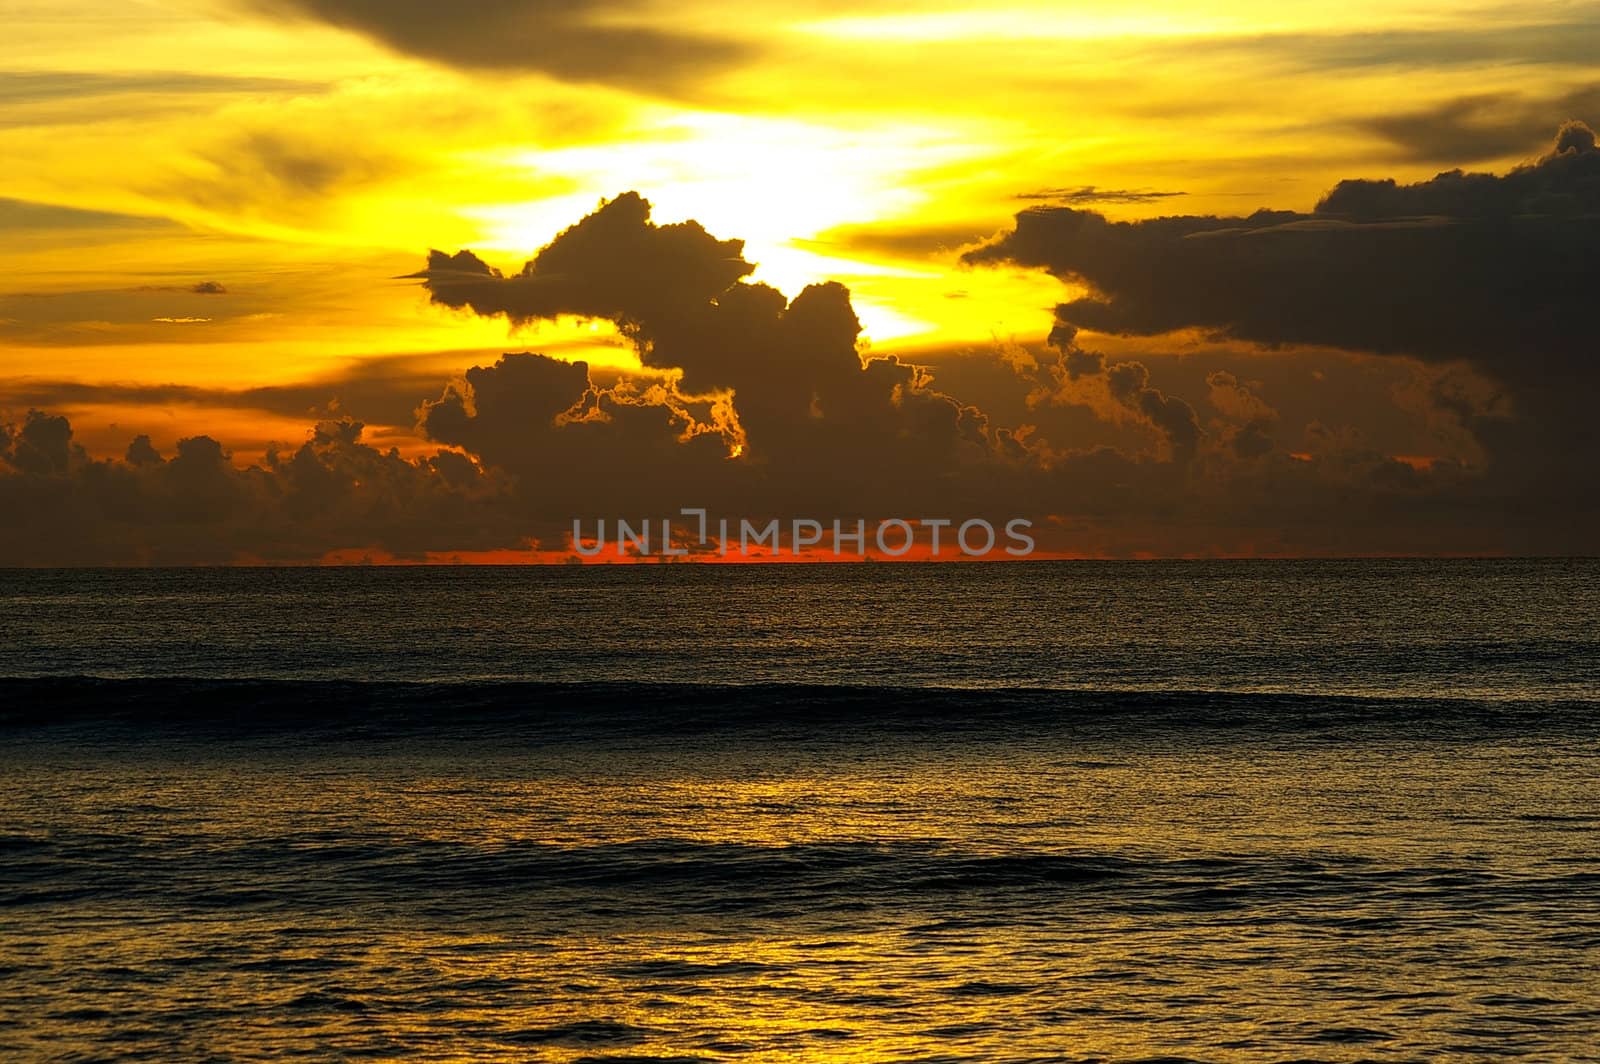 Dramatic sunset sky and ocean, Bali, Indonesia.